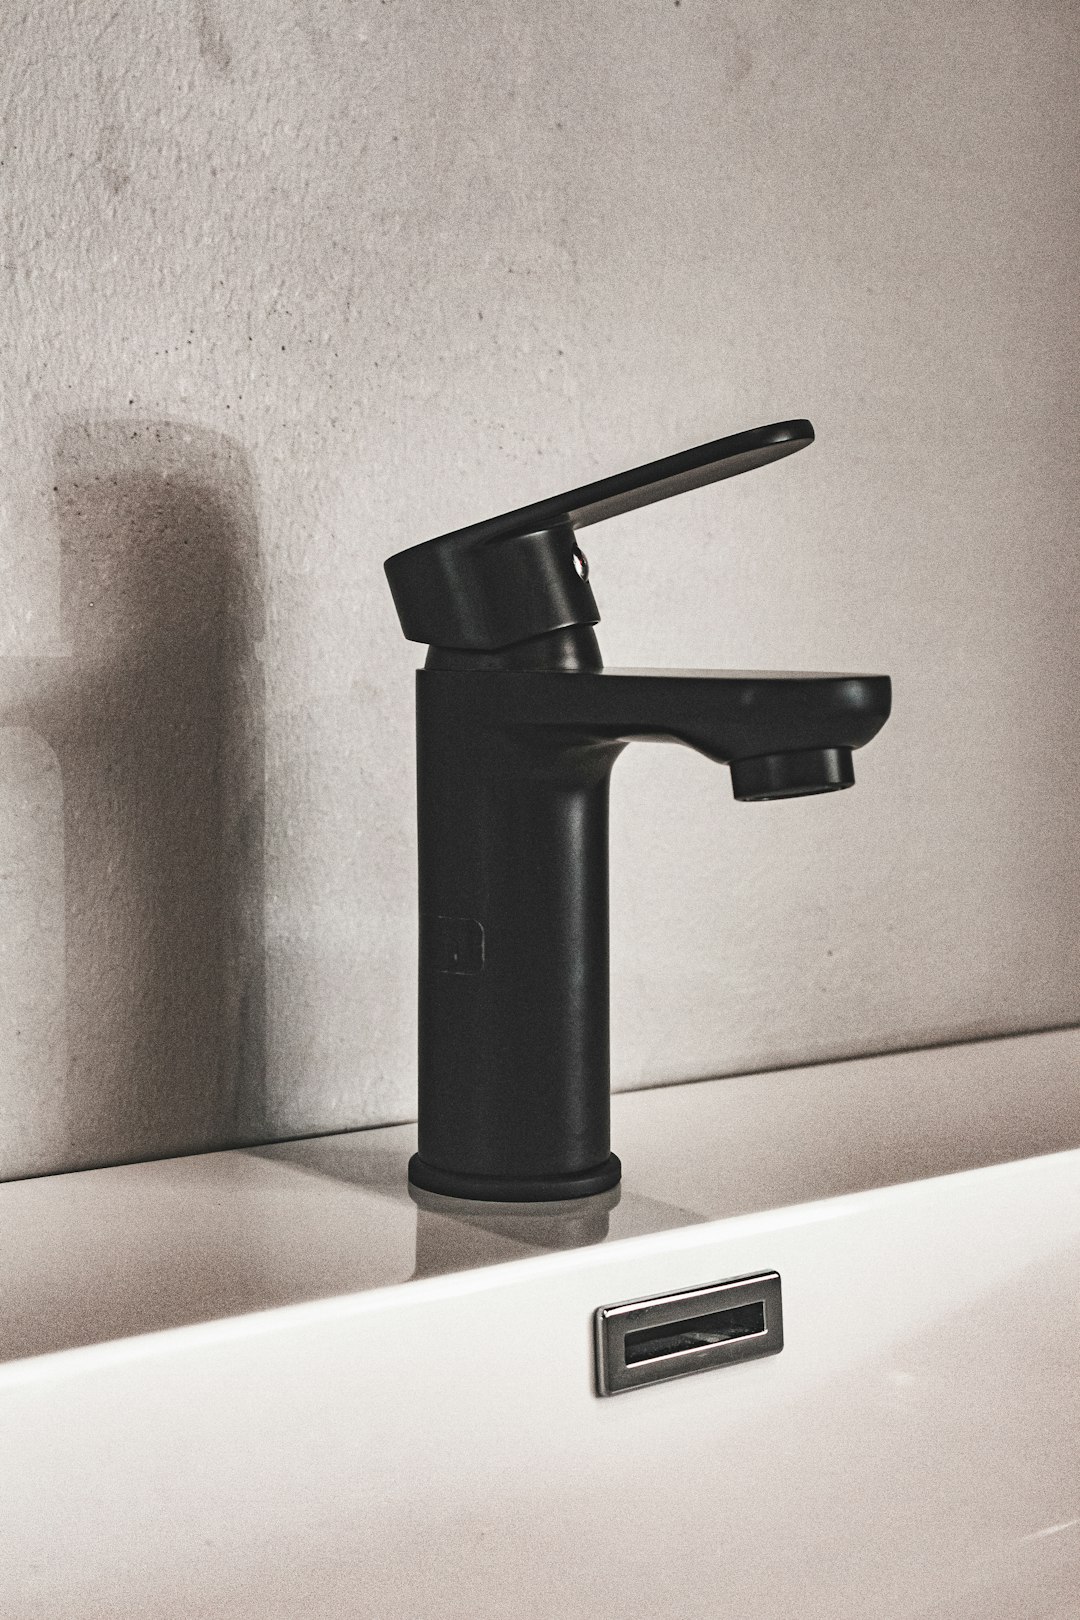  black and silver faucet on white ceramic sink tap